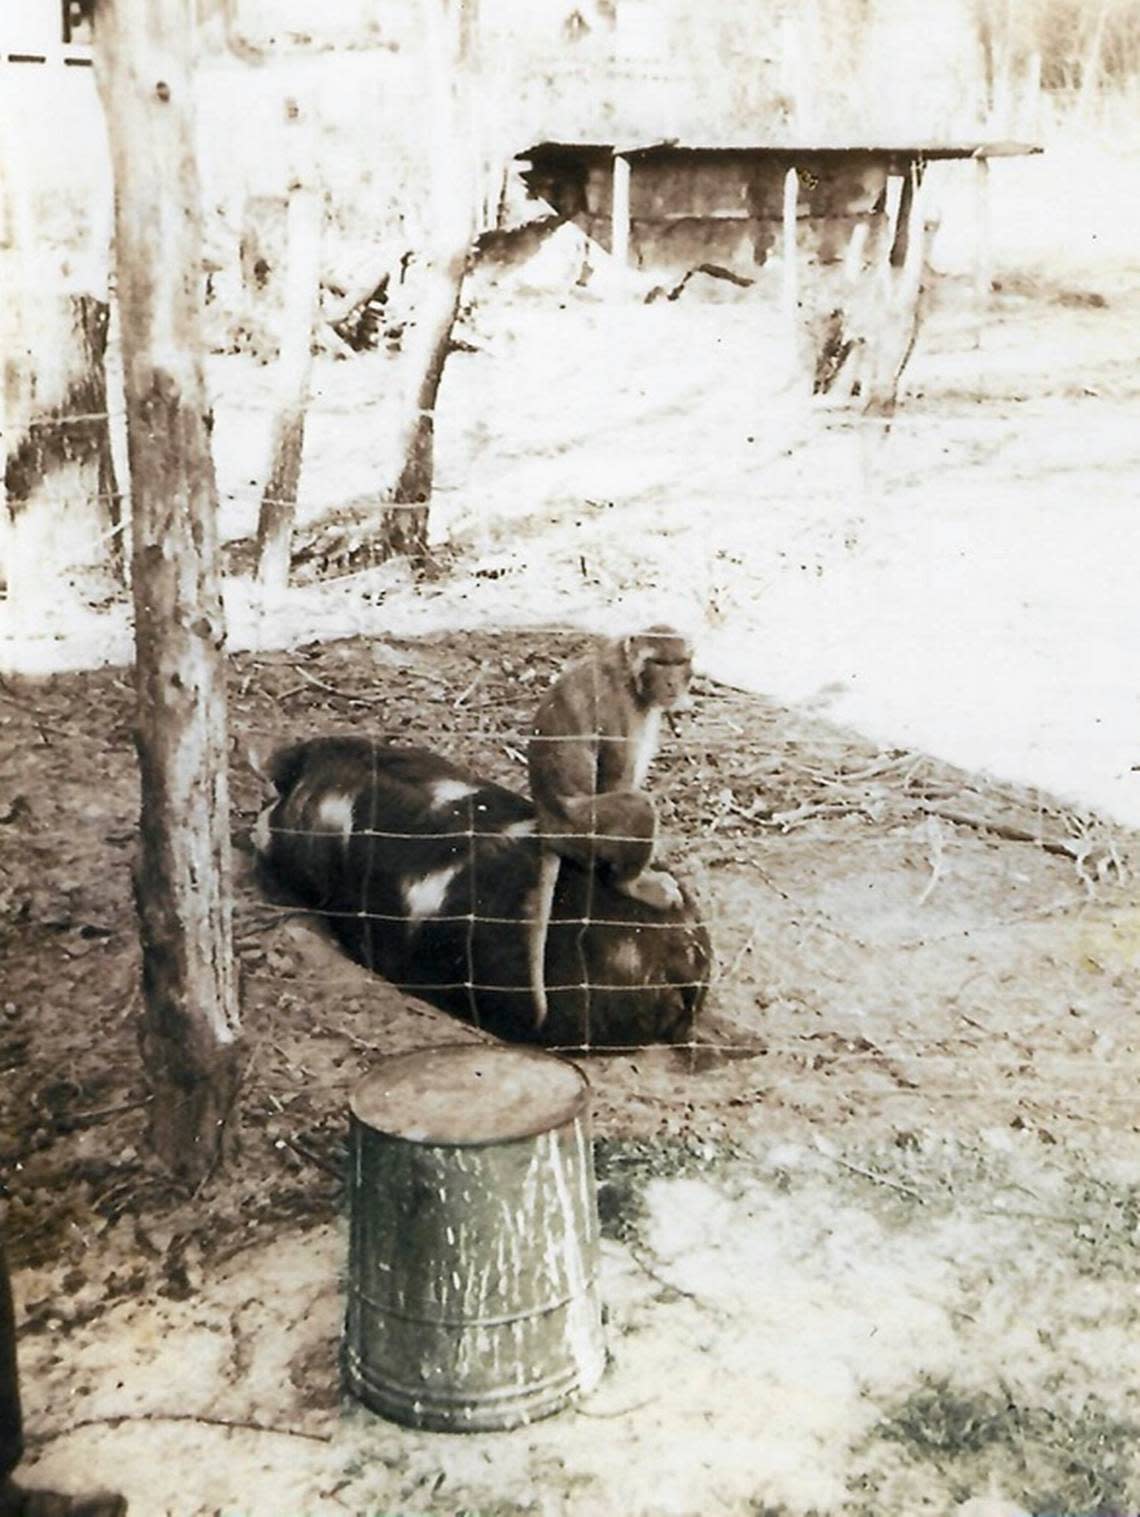 Joe the Monkey riding a pig near his treehouse home at Morris Barbeque in Hookerton, NC, circa 1960.